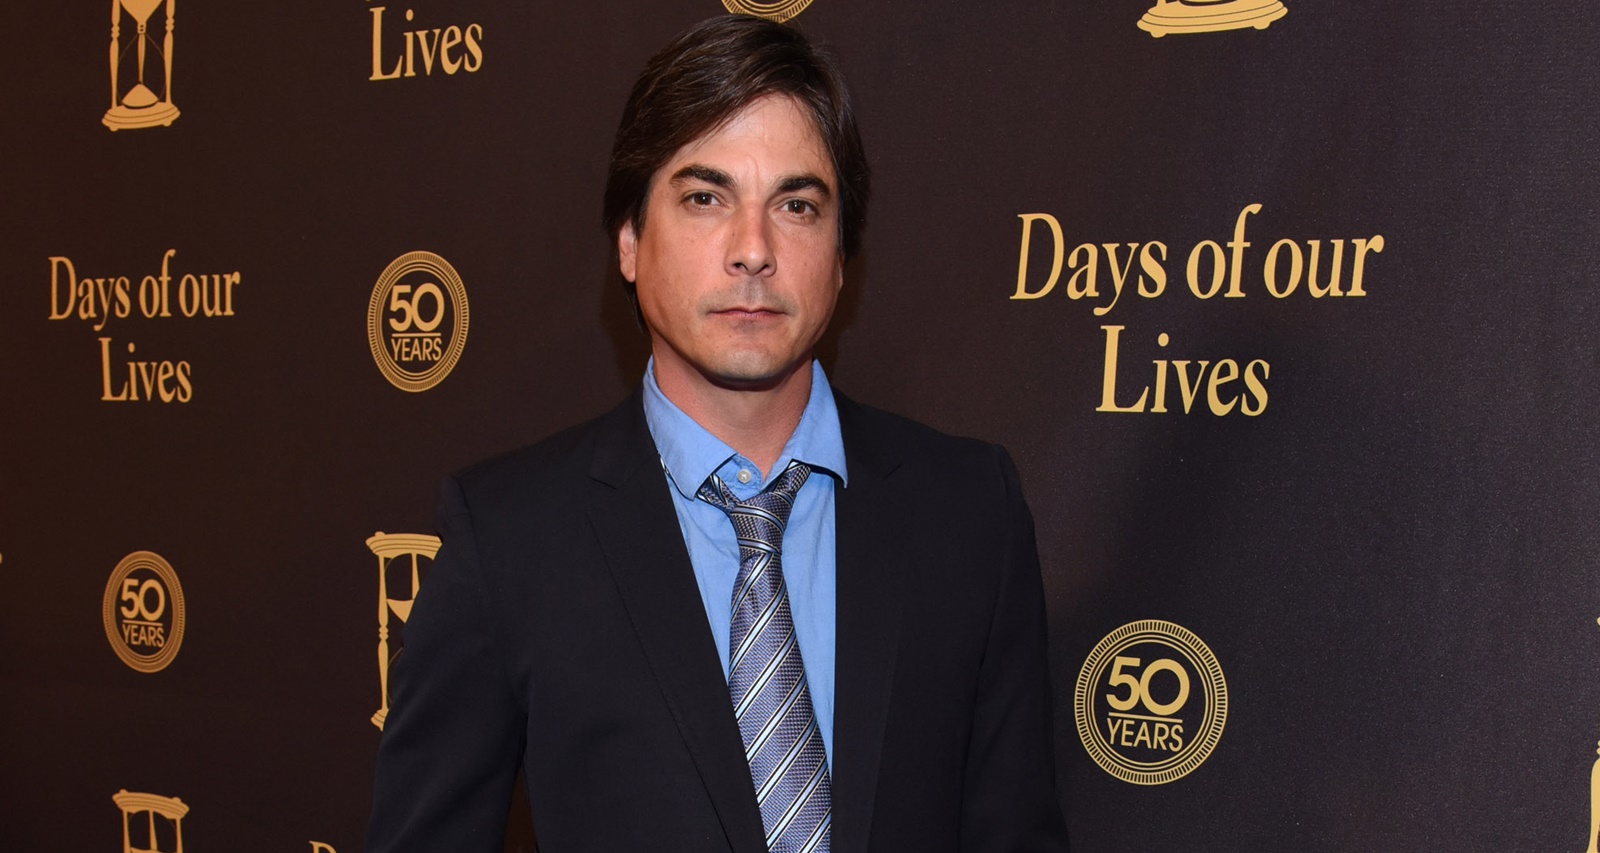 Daytime Soaps: Comings and Goings for Sept 2 to 8: Bryan Dattilo Slated to Return to “DOOL”